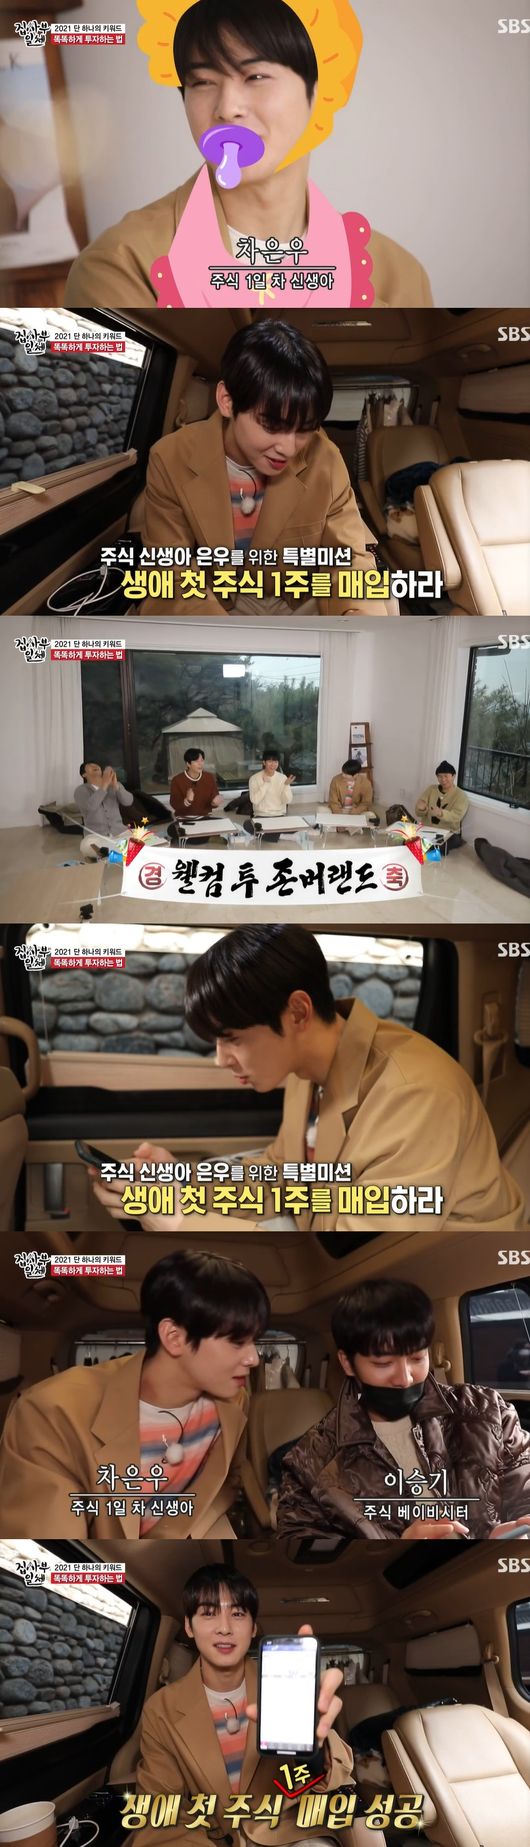 In All The Butlers, Cha Eun-woo made a surprise confession that she started her first life Share.I had time to learn about Share at SBS entertainment All The Butlers broadcast on the 28th.On the day of the production, when asked about the hot keyword that pays attention to 2021, Yang Se-heeong said, Upwriting man, a person who grows and upgrades. In fact, everyone is Share, now too.Lee Seung-gi said that Yang Se-heeong is the most adhering, as Shin Sung-rok and Kim Dong-hyun are in Share these days.The members also said, This area is Warren Buffett, a teacher with the basic skills and skills of Share. Yang Se-heeong said, There is a word for roll co-life, it follows the fast trend like a roller coaster, but I am worried about the impatient investment tendency.At this time, Cha Eun-woo also said, I am an ant too, and did not originally Share but jumped into Shareland, but she was a Share newborn but she entered the first Share of life.Lee Seung-gi was also surprised to hear that he was helped by the event.Cha Eun-woo said, It is a back-up deposit and I started Share for a week. Lee Seung-gi said, I am confident about L, and I am really in Korea. But I did not buy it, I was just looking at the timing.But to Cha Eun-woo, who is not very nervous, Shuka said, Even if you do not care a lot, you have to invest.Cha Eun-woo said, If you save a lot of money than investing, you have interest. Asked if you should invest in risky assets, Shuka said, When you feel that the asset growth rate is slower than the surroundings, He said.He said that some of his resting cash assets should be allowed to roll on their own.All The Butlers broadcast screen capture